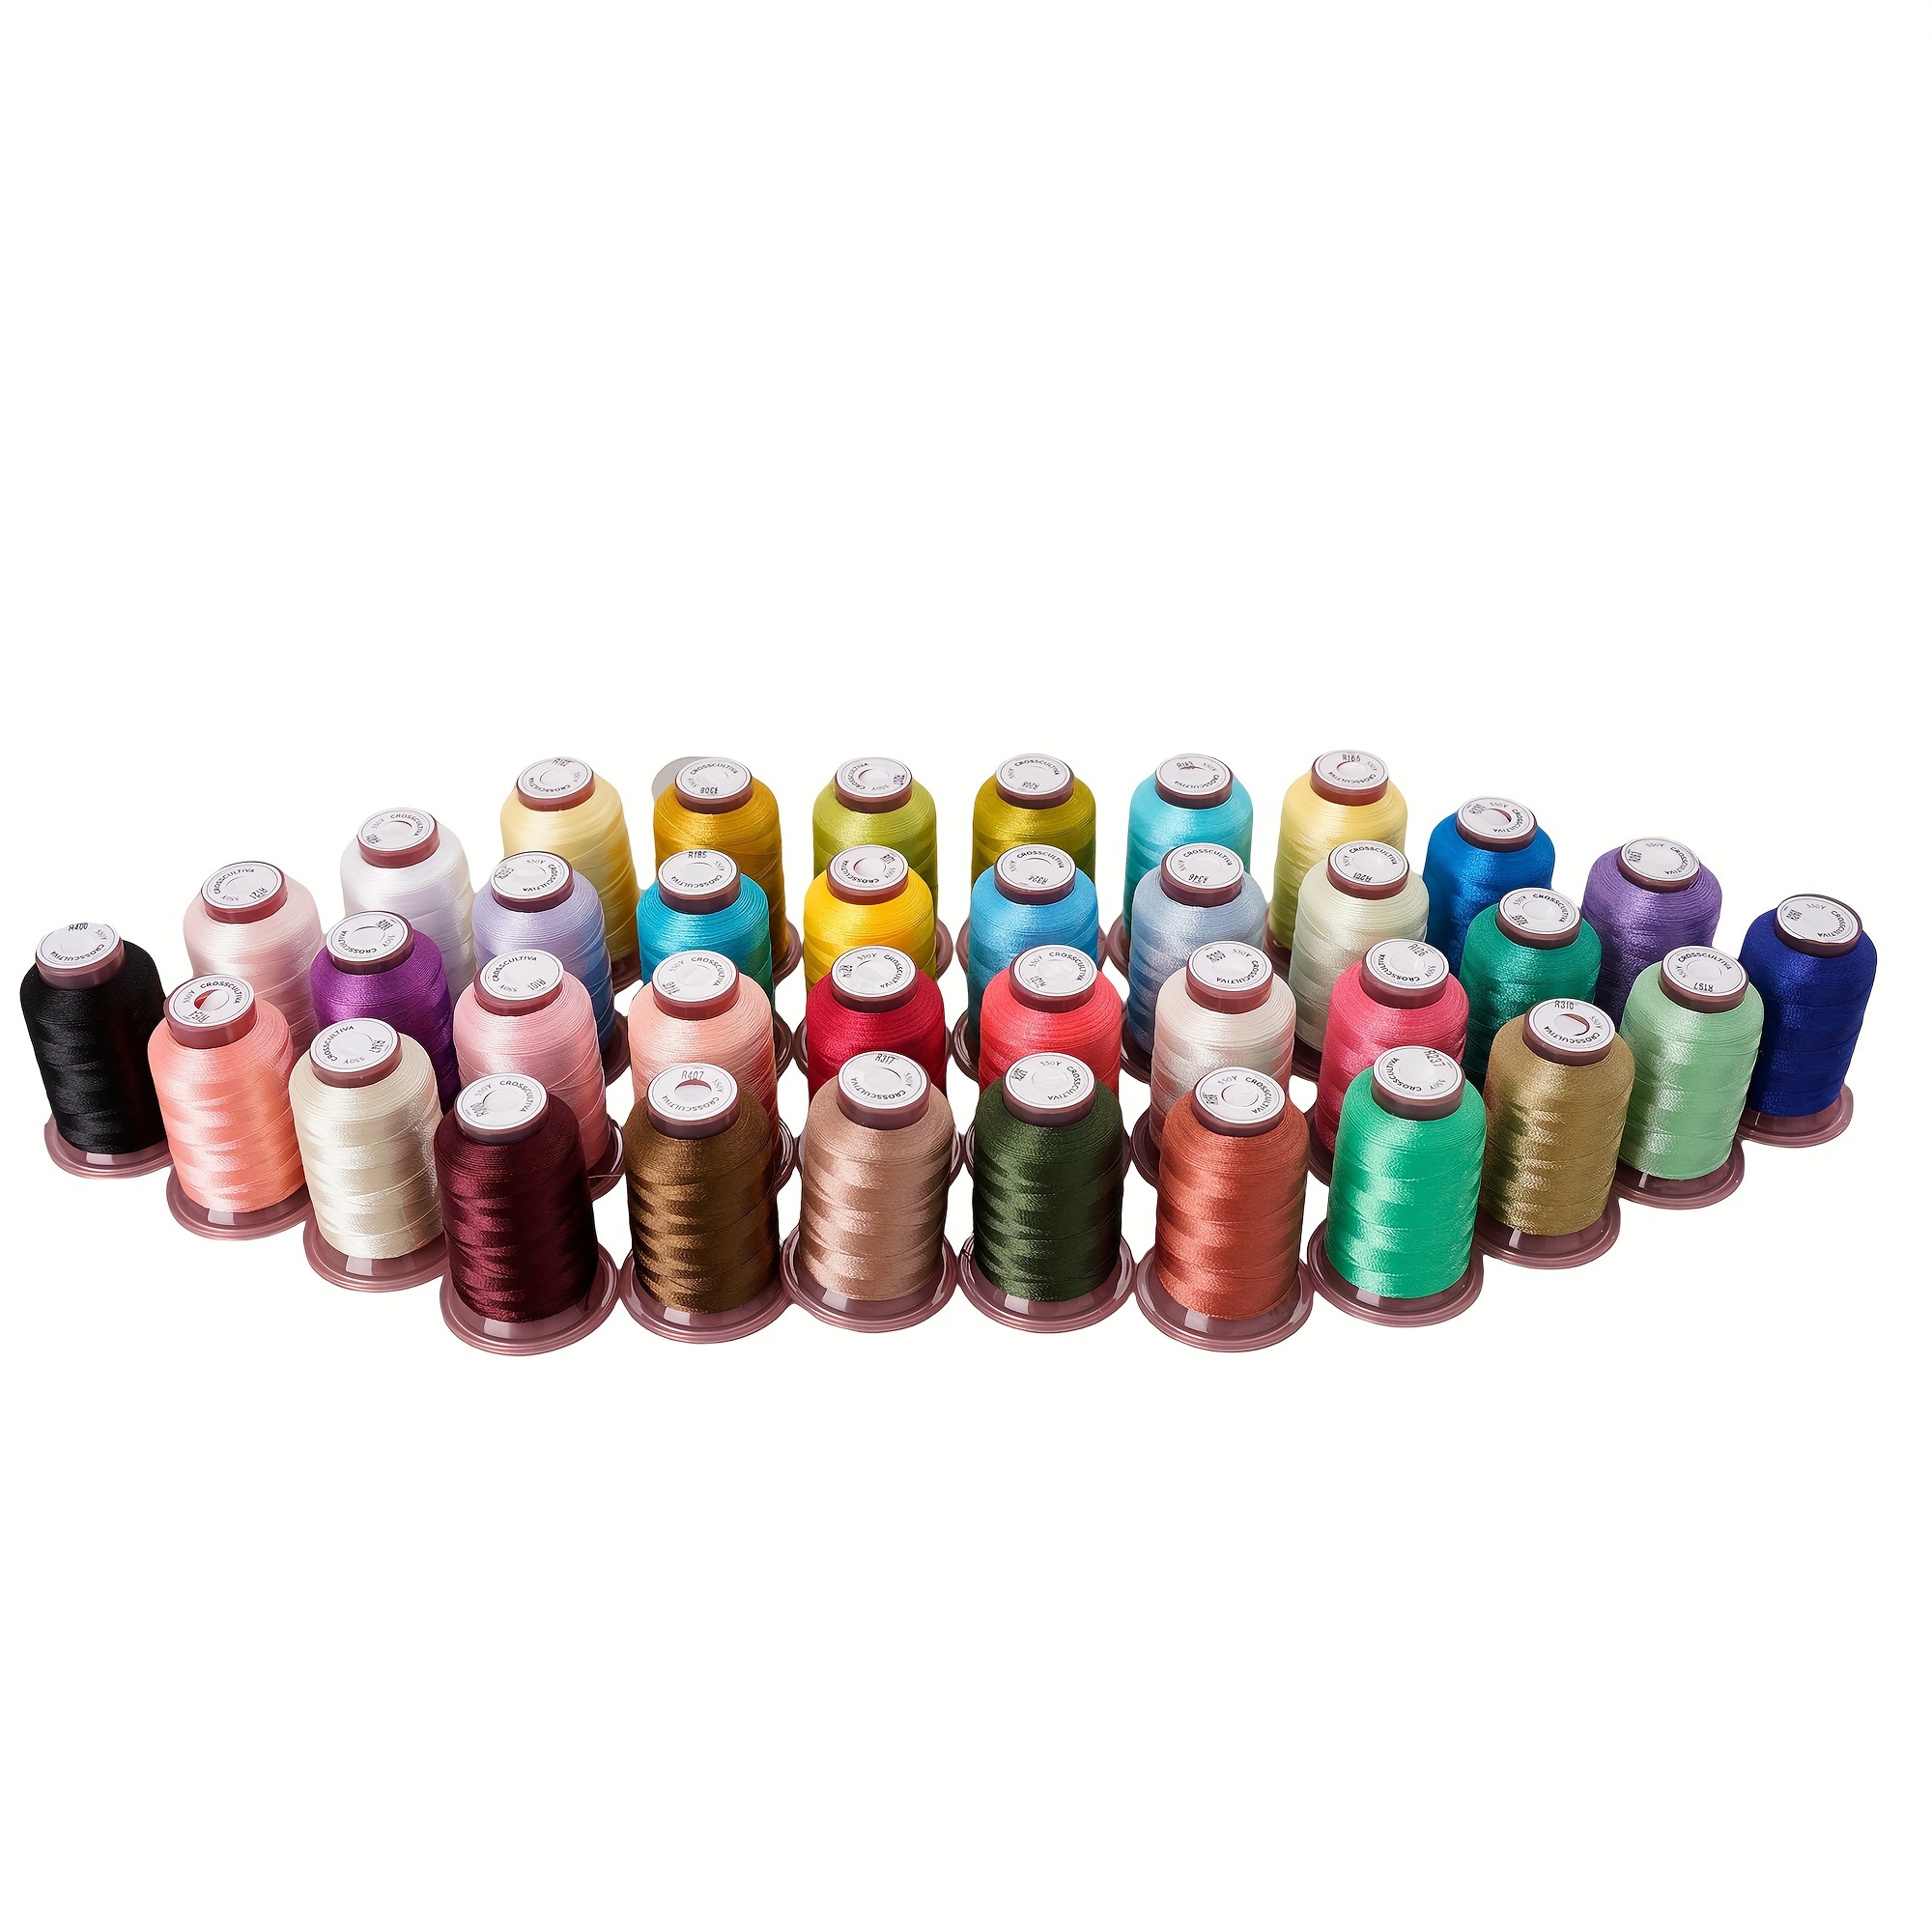 

36colors Embroidery Machine Thread Set-550 Yards Per Spool For Machine Embroidery Use